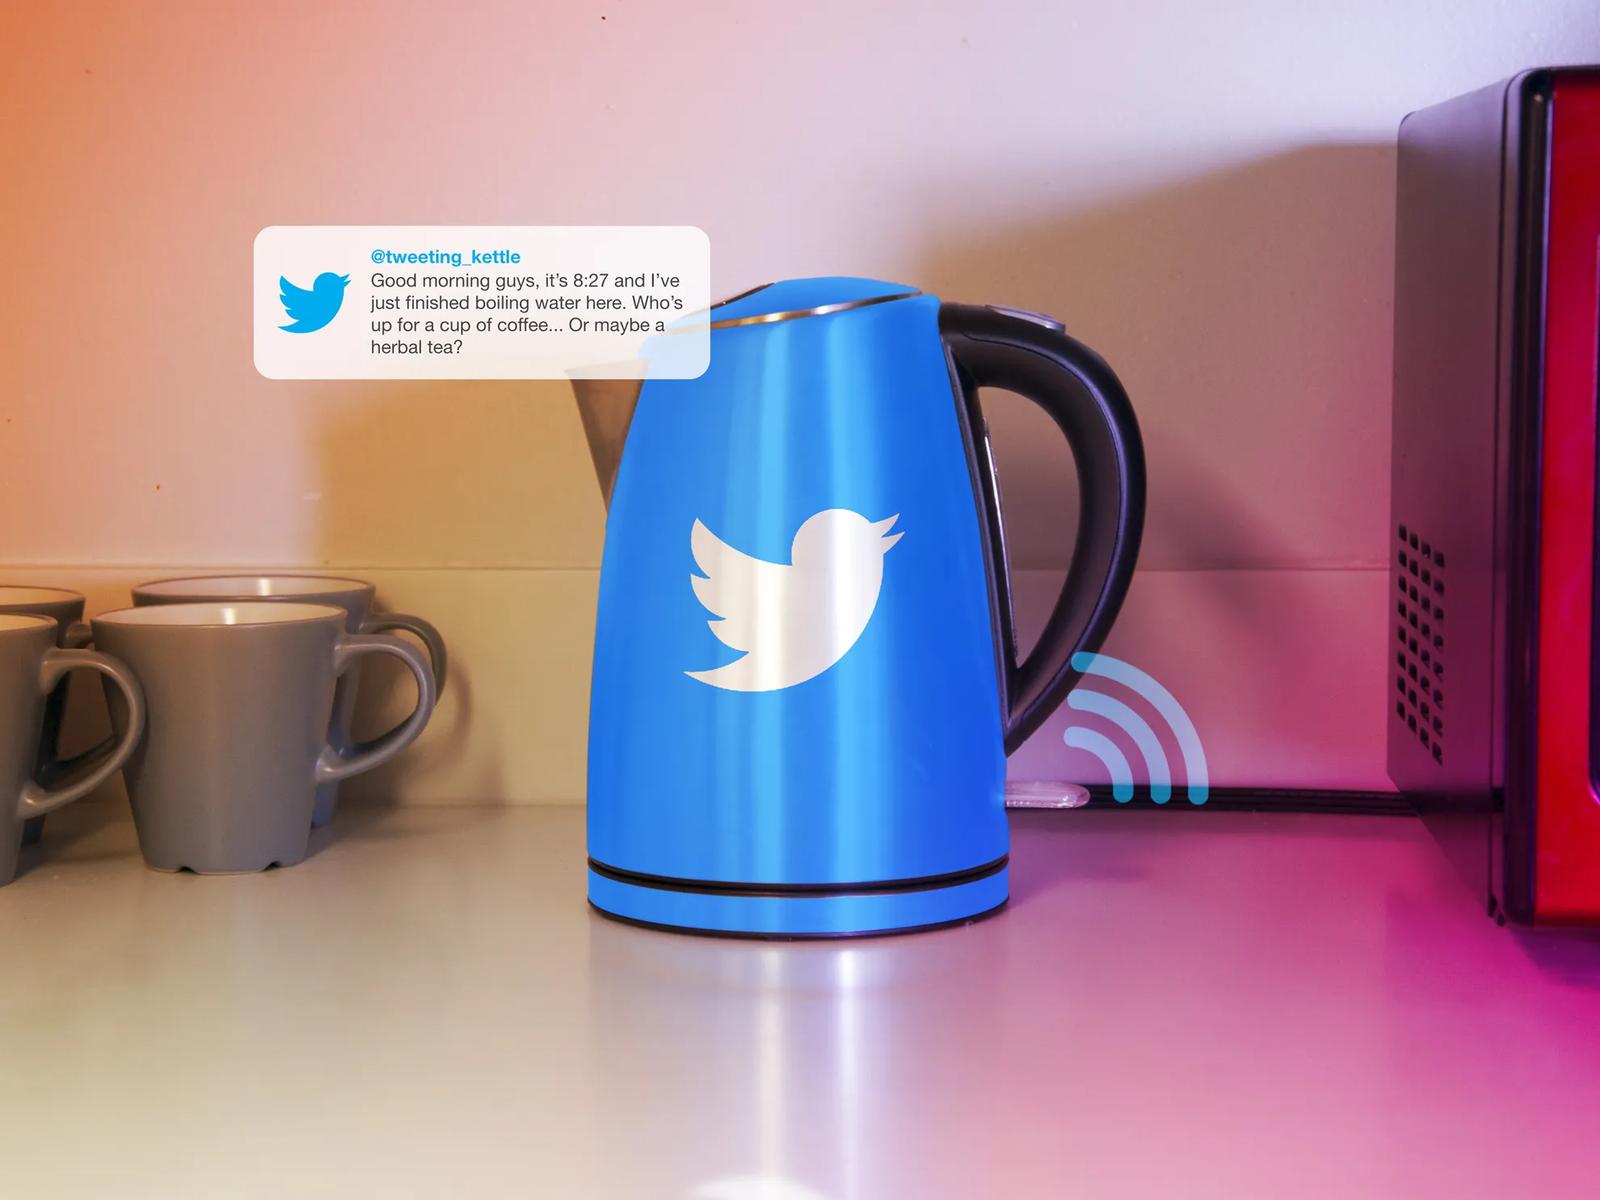 Smart Kettle Tweets to Save Energy and Inspire Change